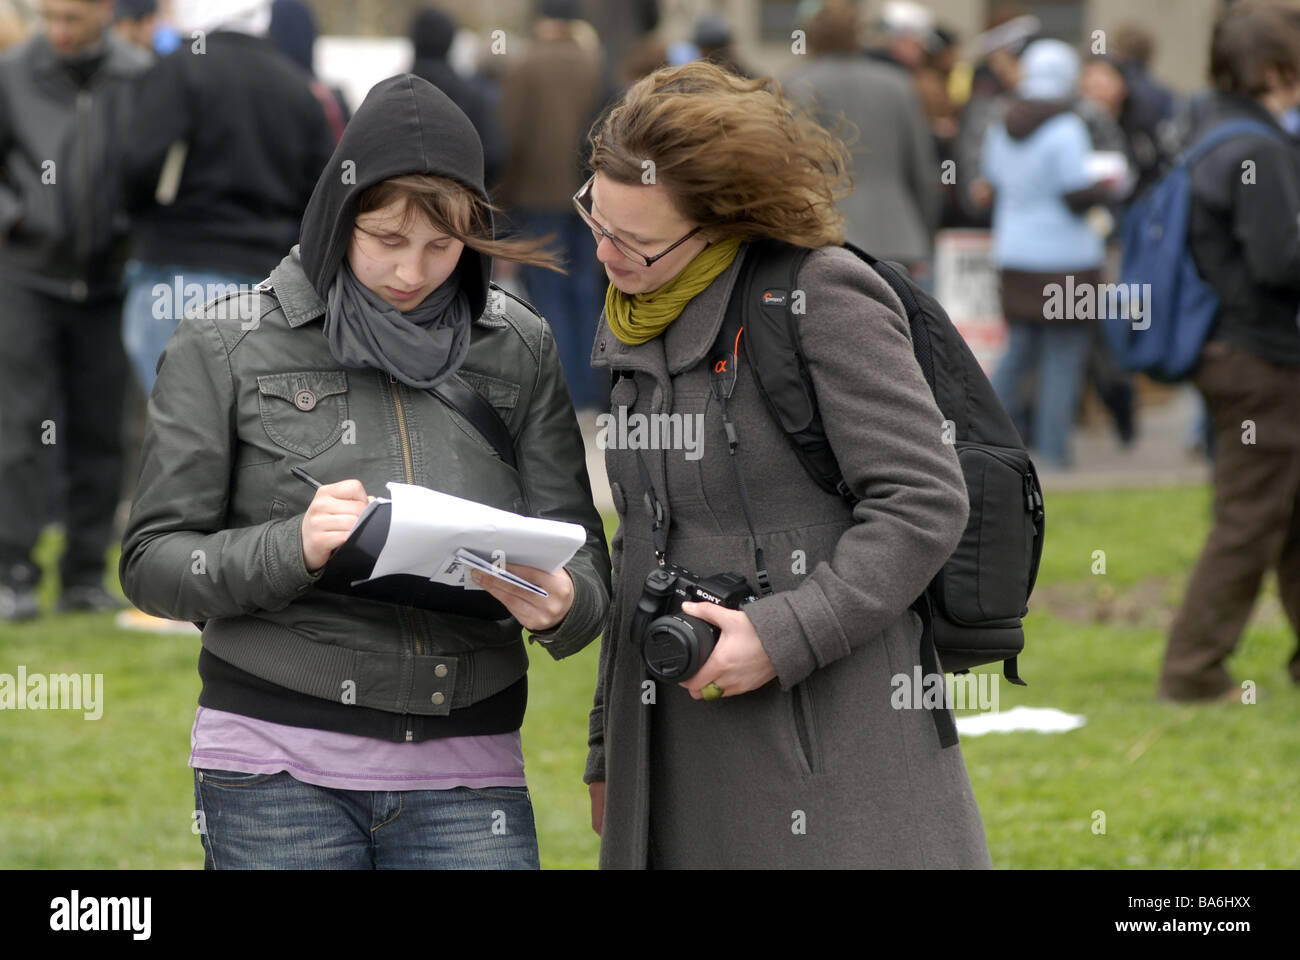 A volunteer right collects signatures on a petition in Battery Park in New York Stock Photo